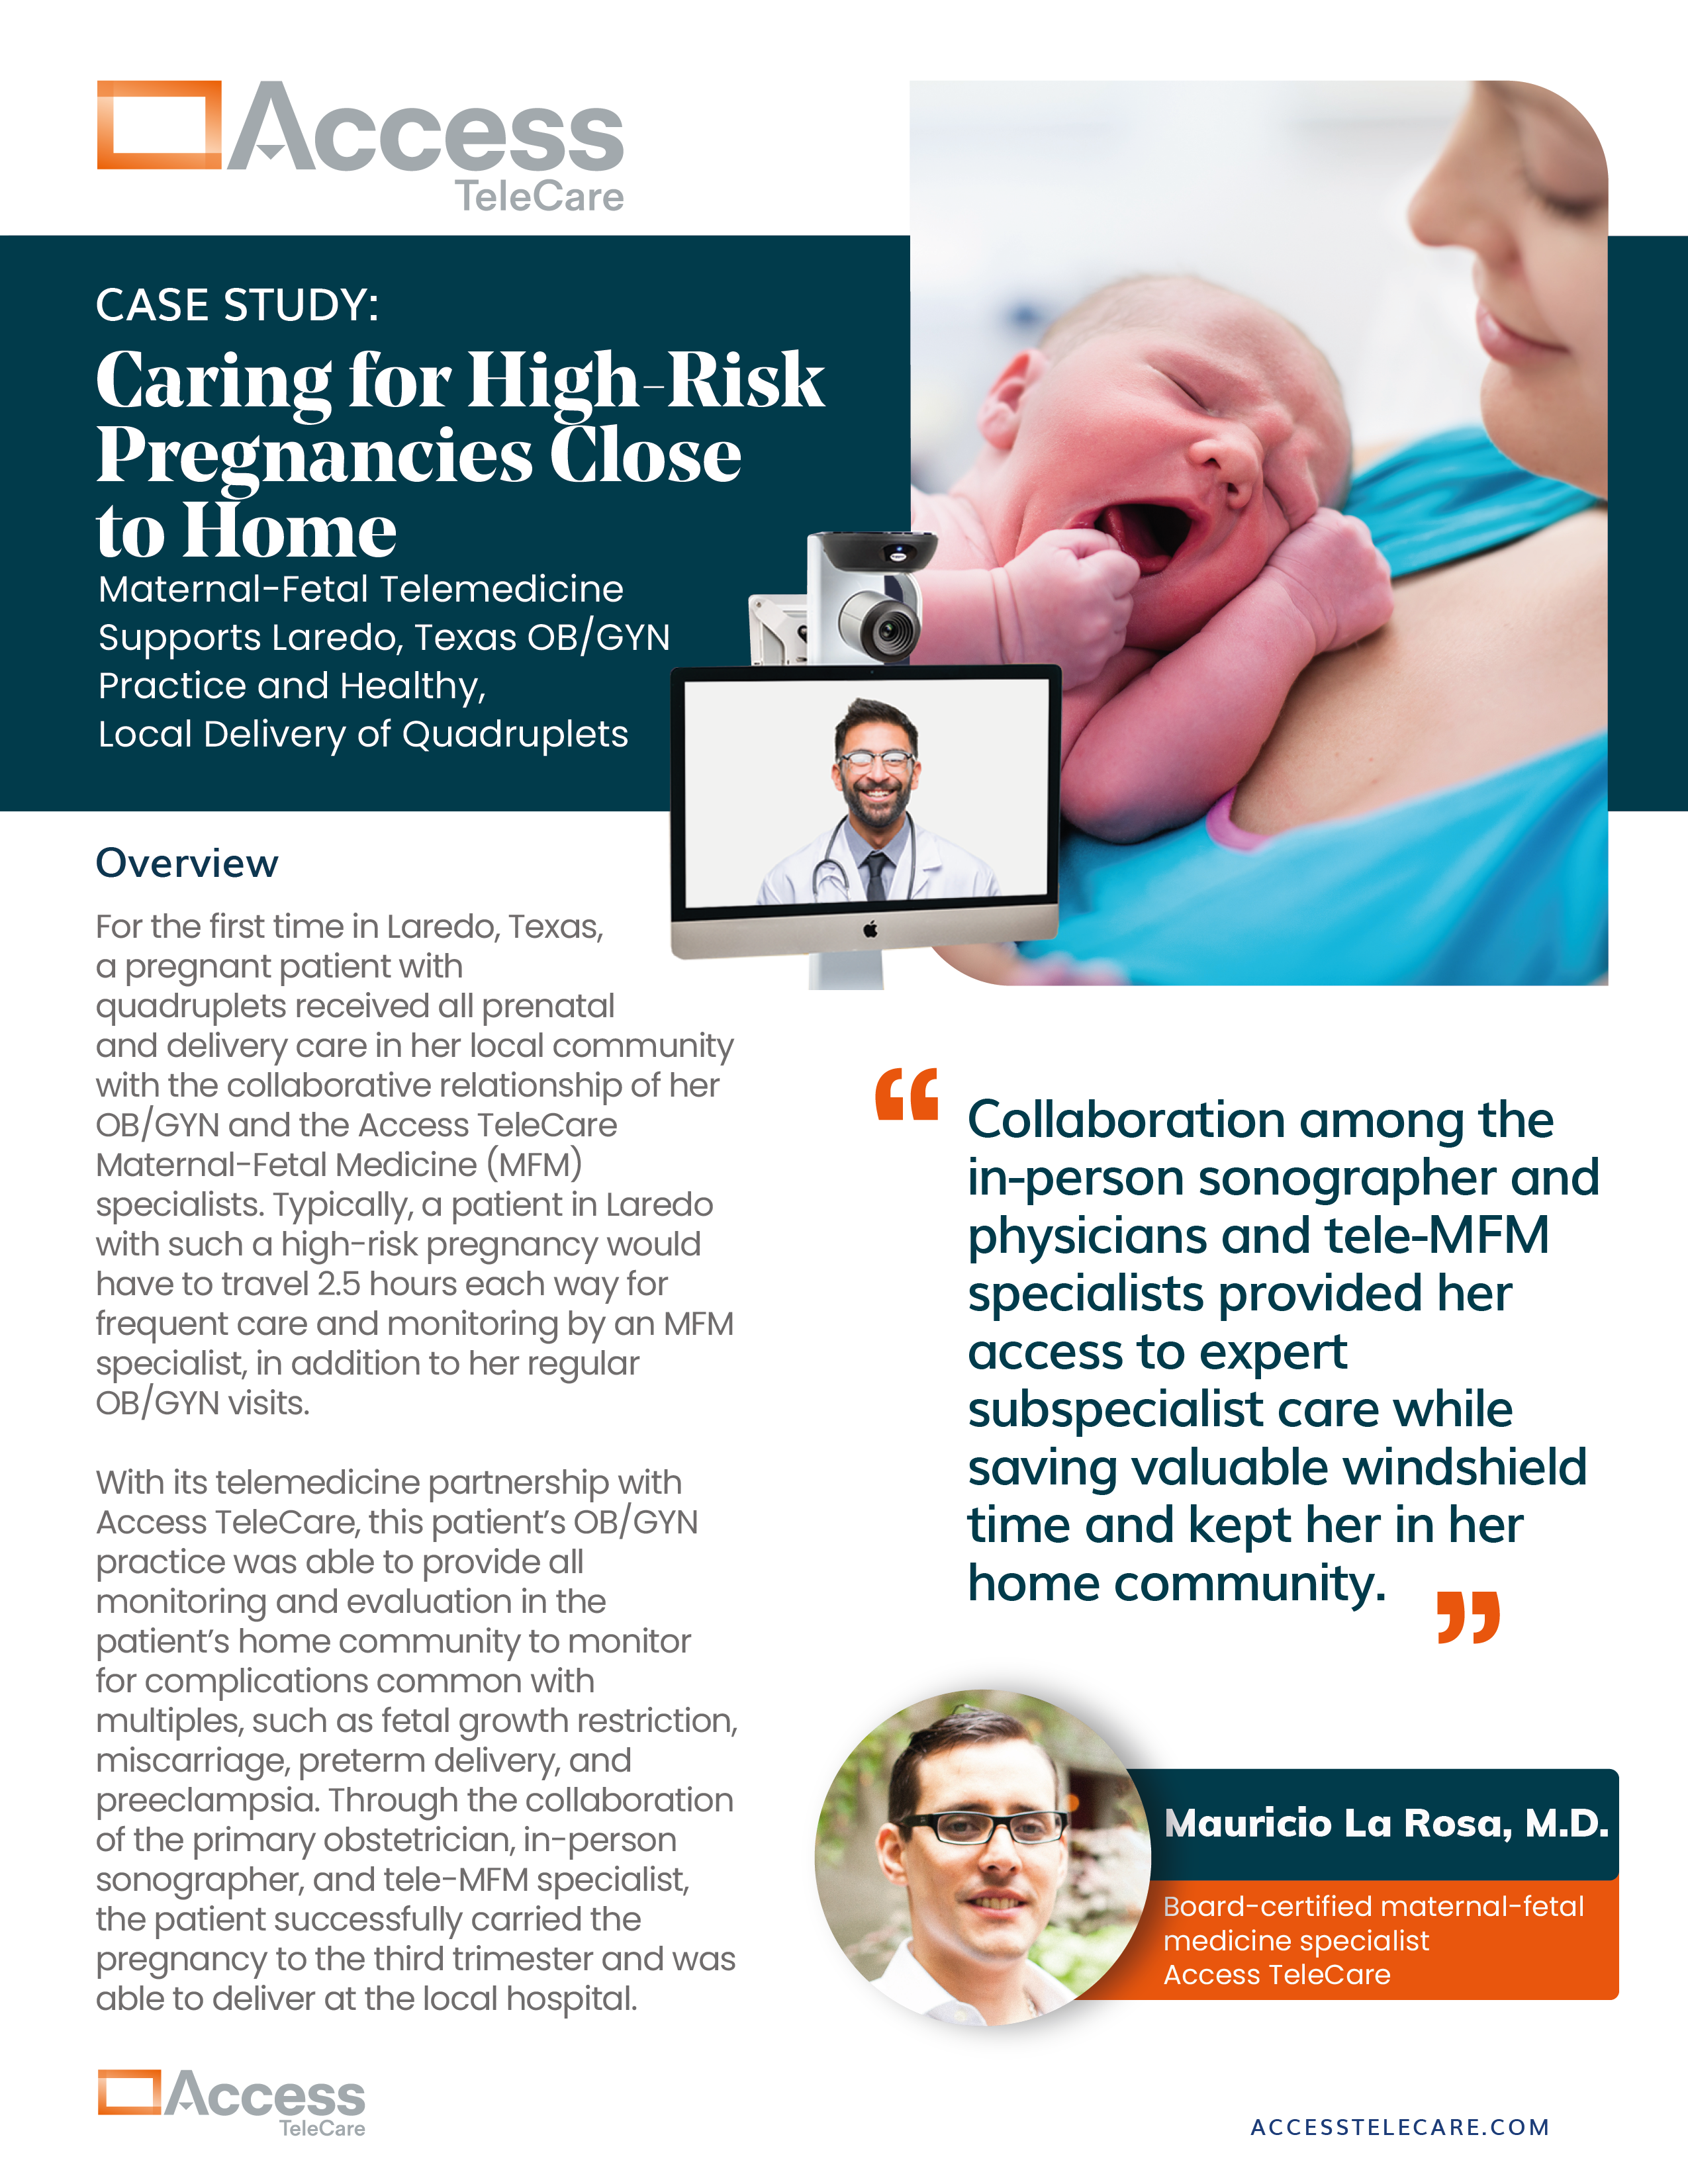 Telematernal-fetal medicine case study. Caring for high-risk pregnancies close to home. Overview by Mauricio La Rosa, M.D.